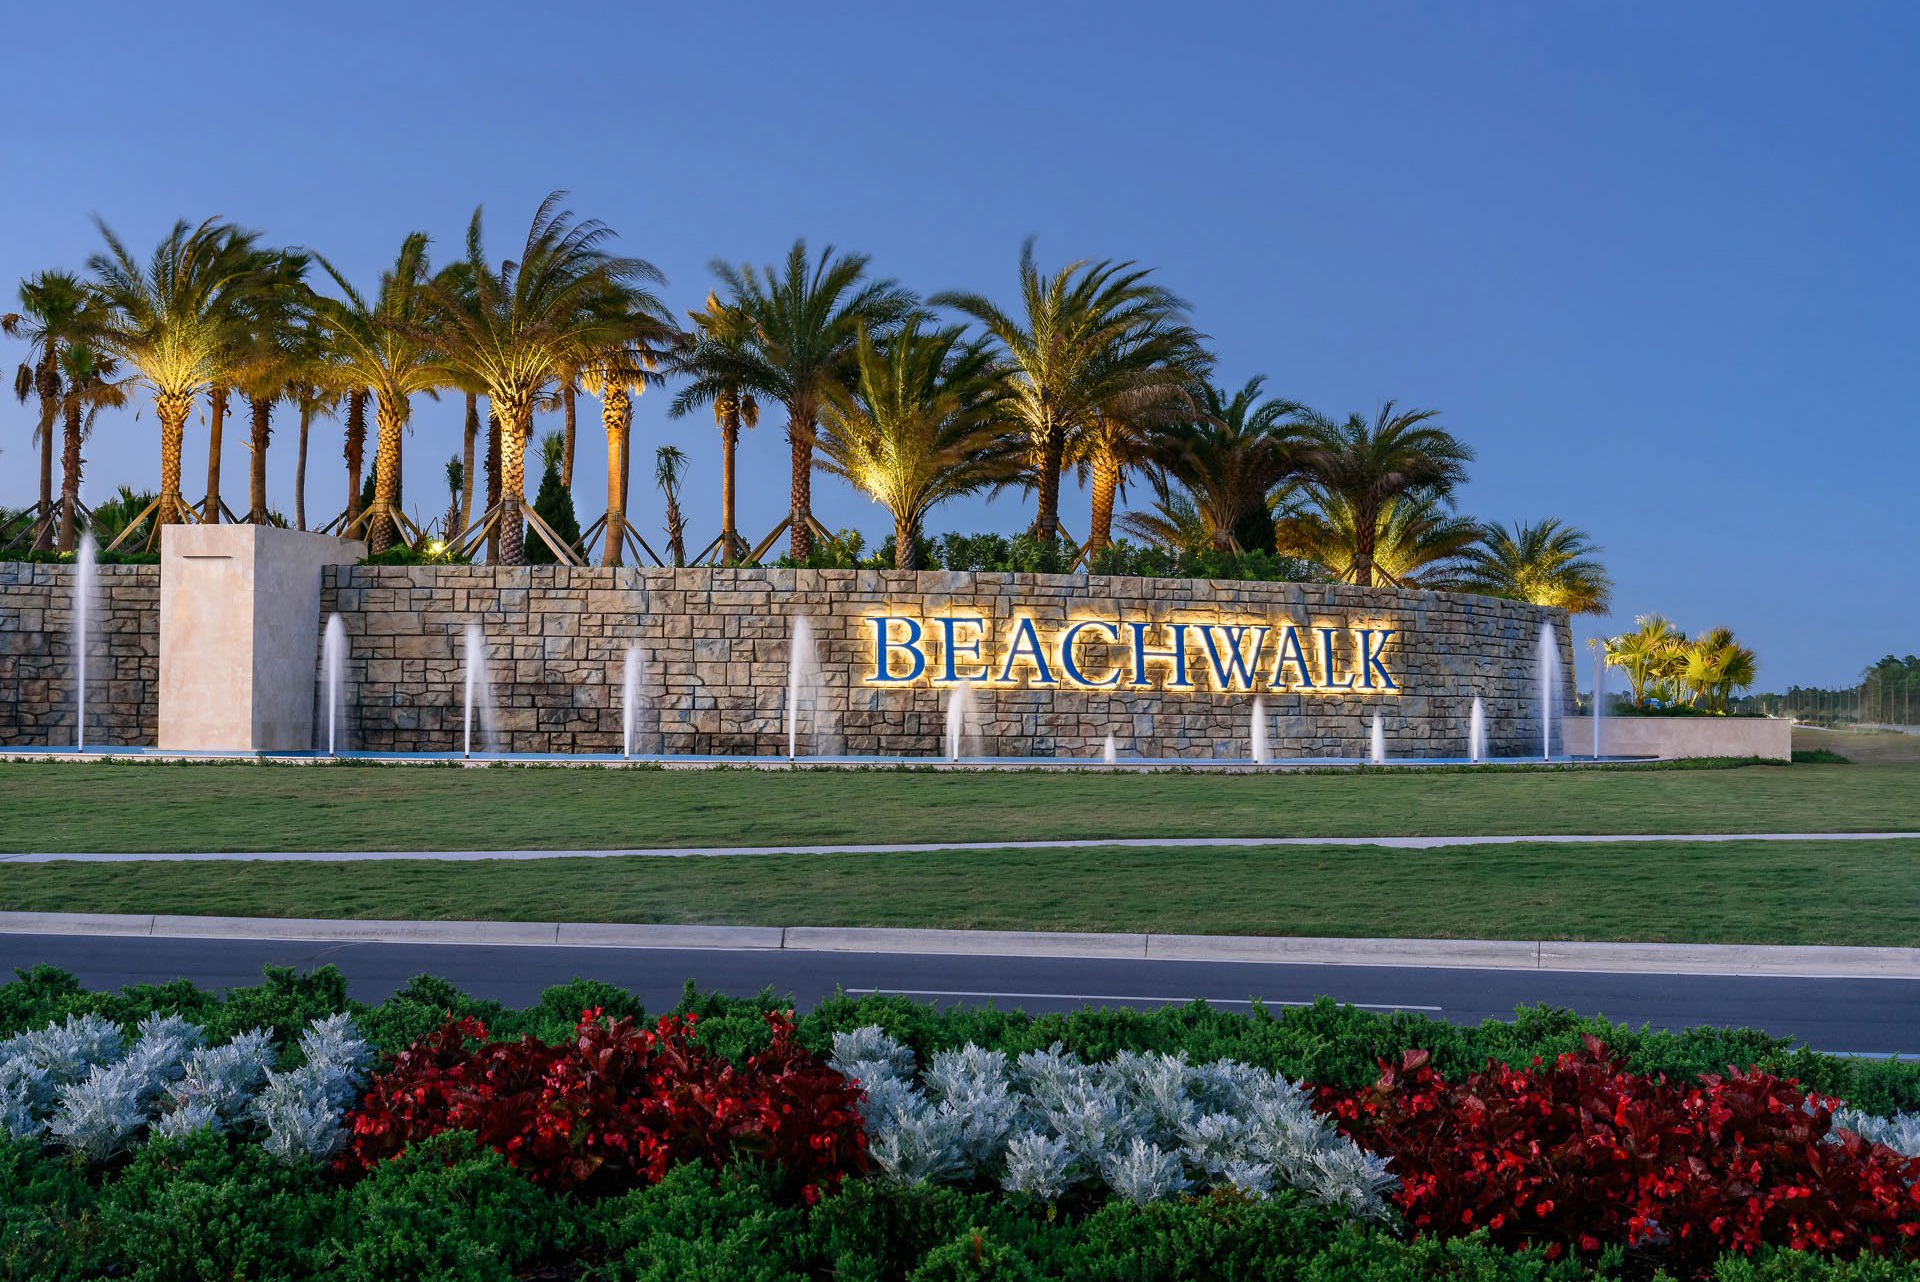 Beachwalk is the master-planned community in St. Johns County along County Road 210.